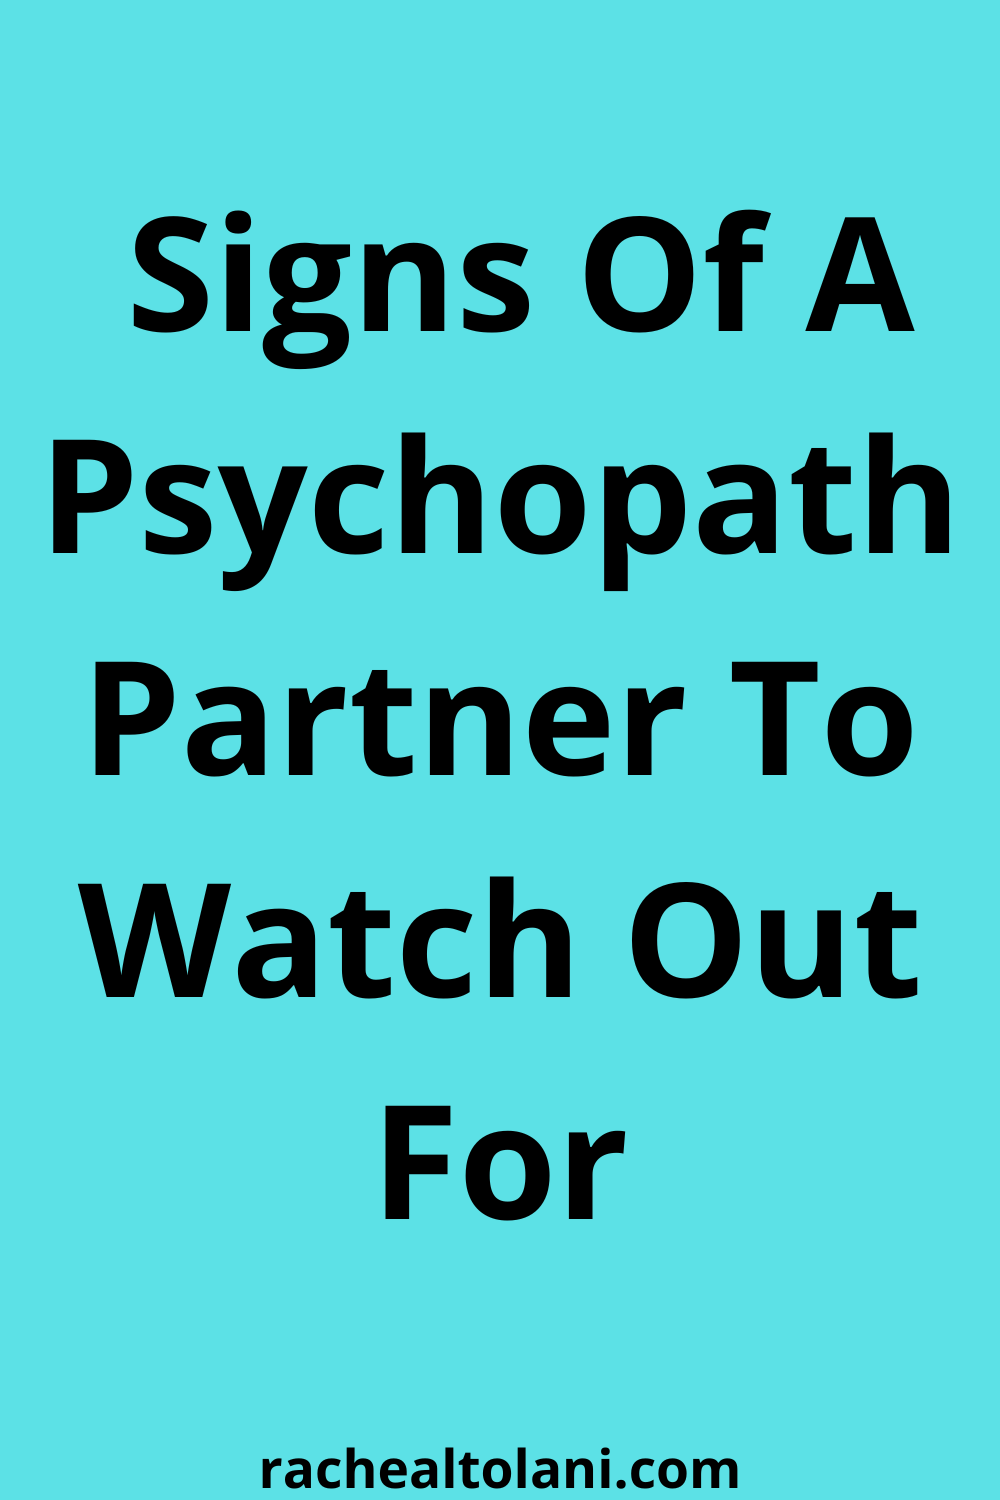 Signs Of A Psychopath Partner